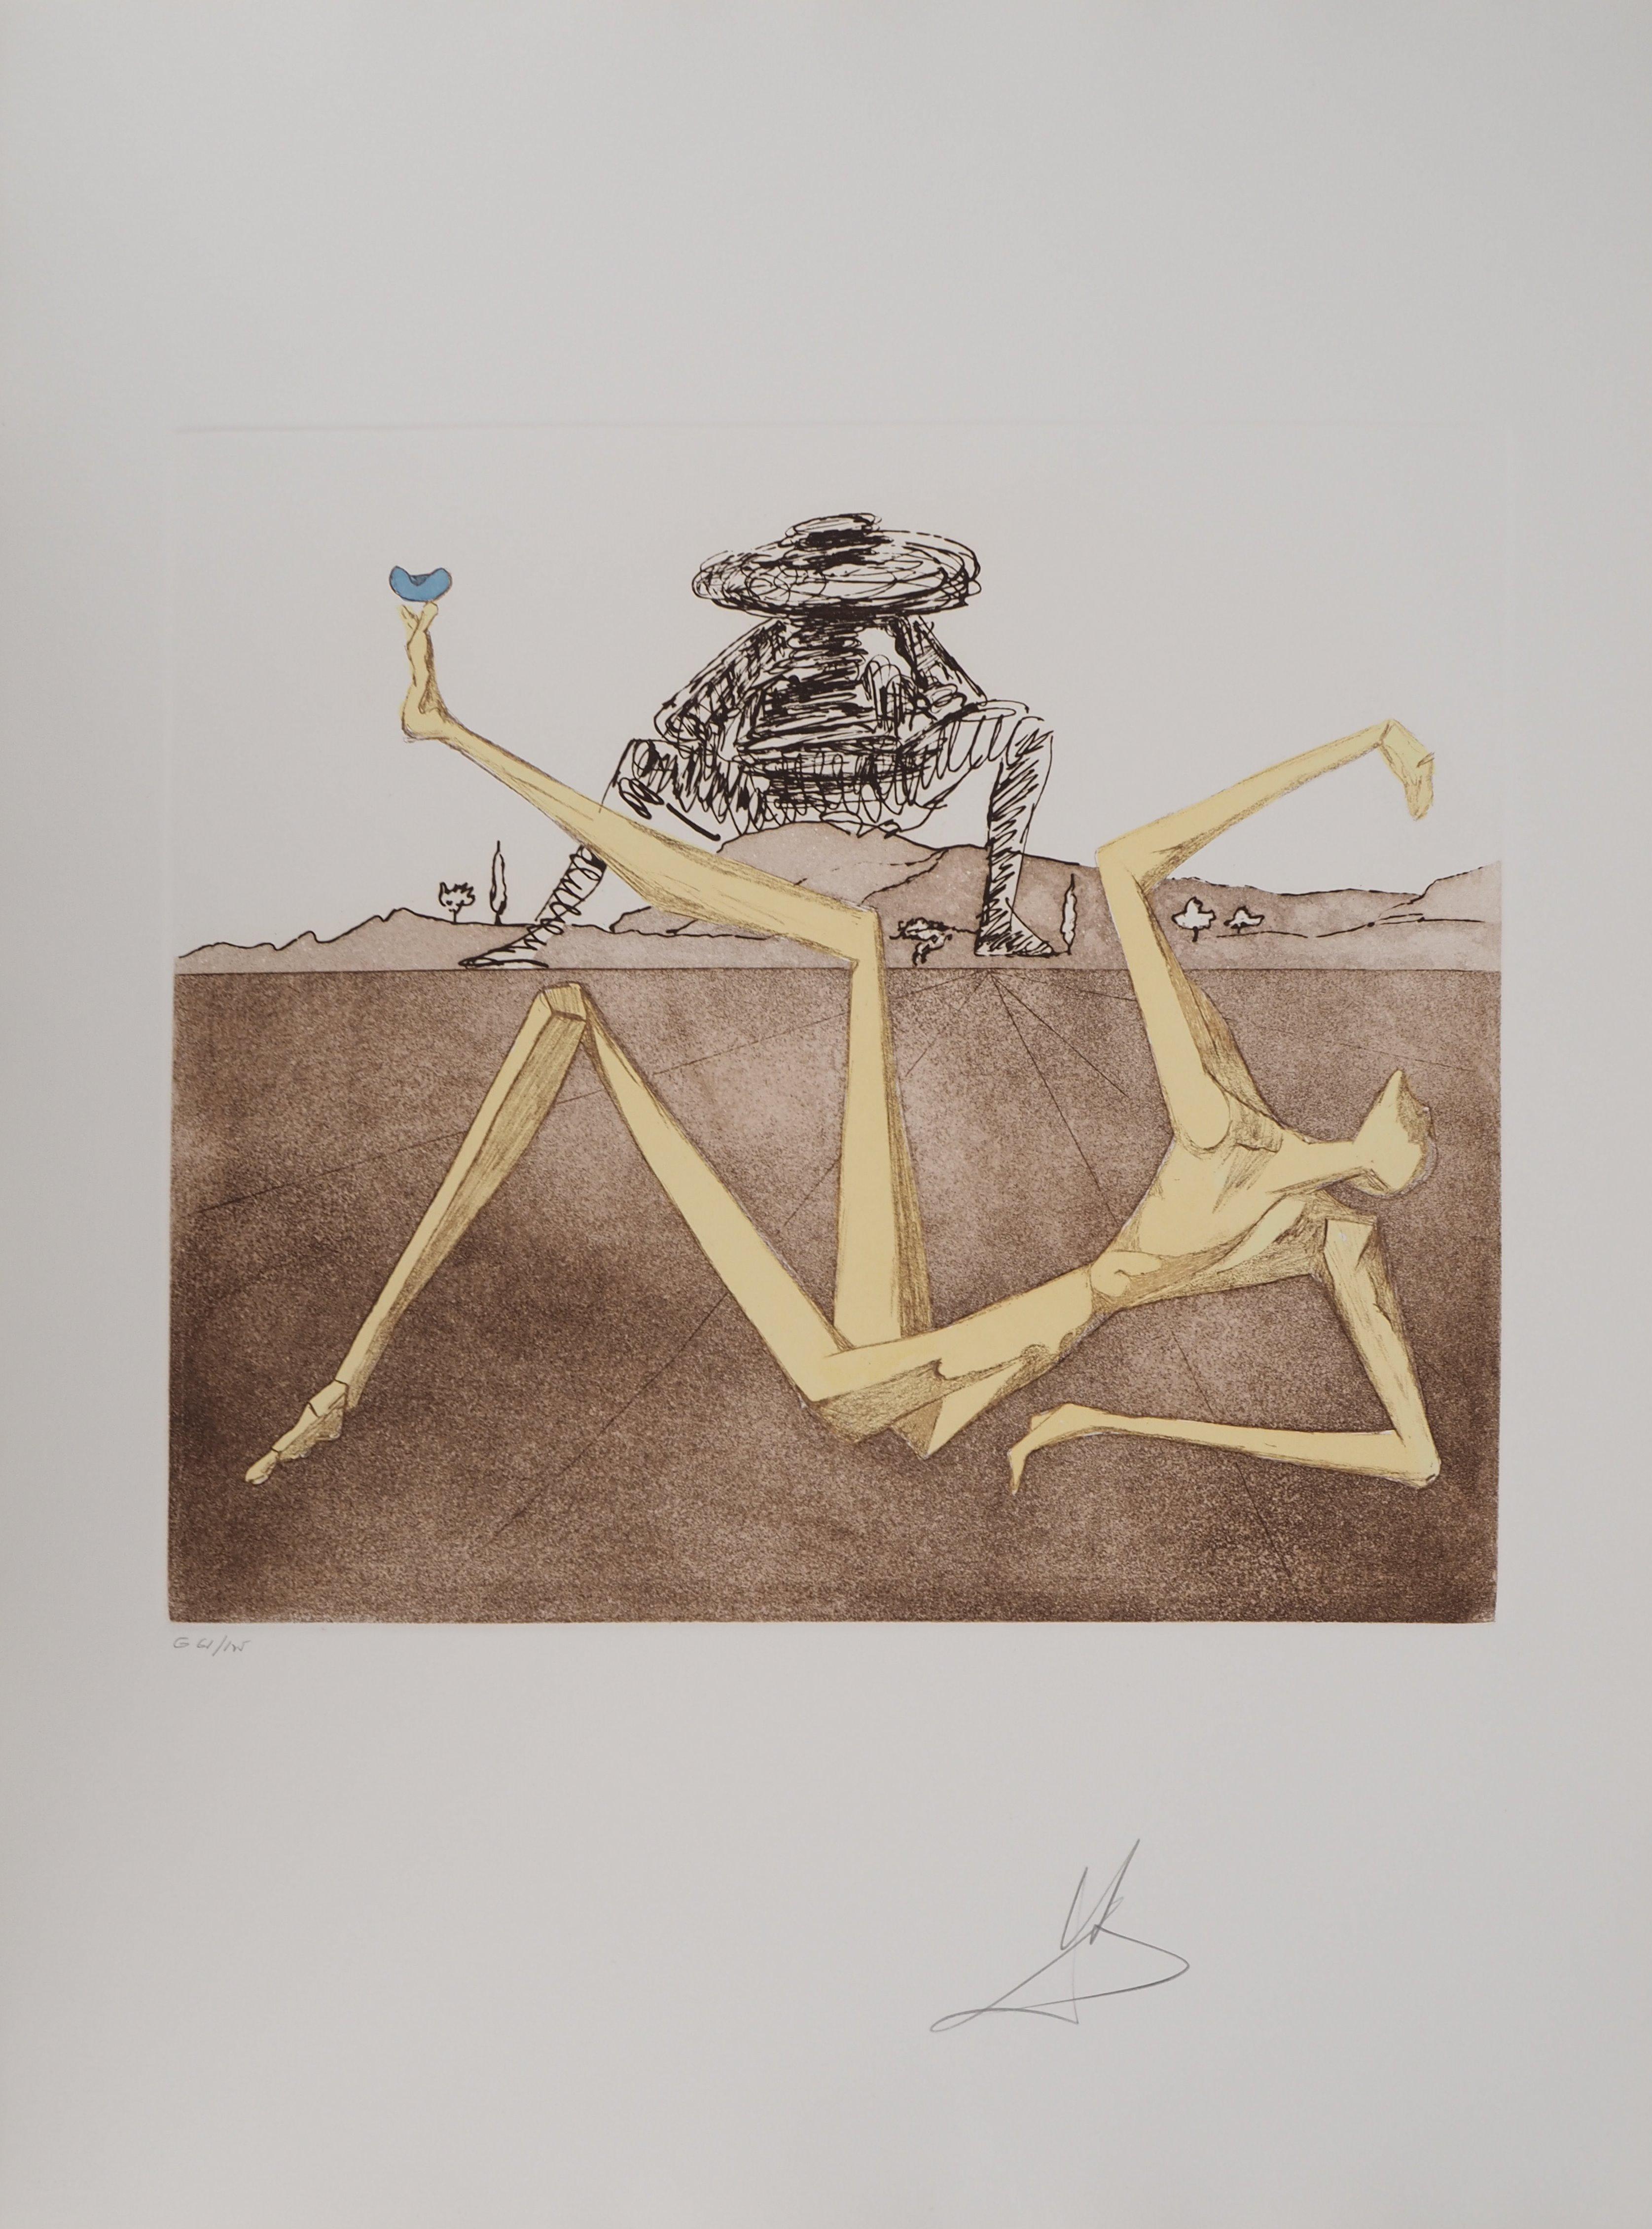 Salvador Dalí Portrait Print - Don Quijote : The Heart of Madness - Original etching, Handsigned (Field #80-1J)